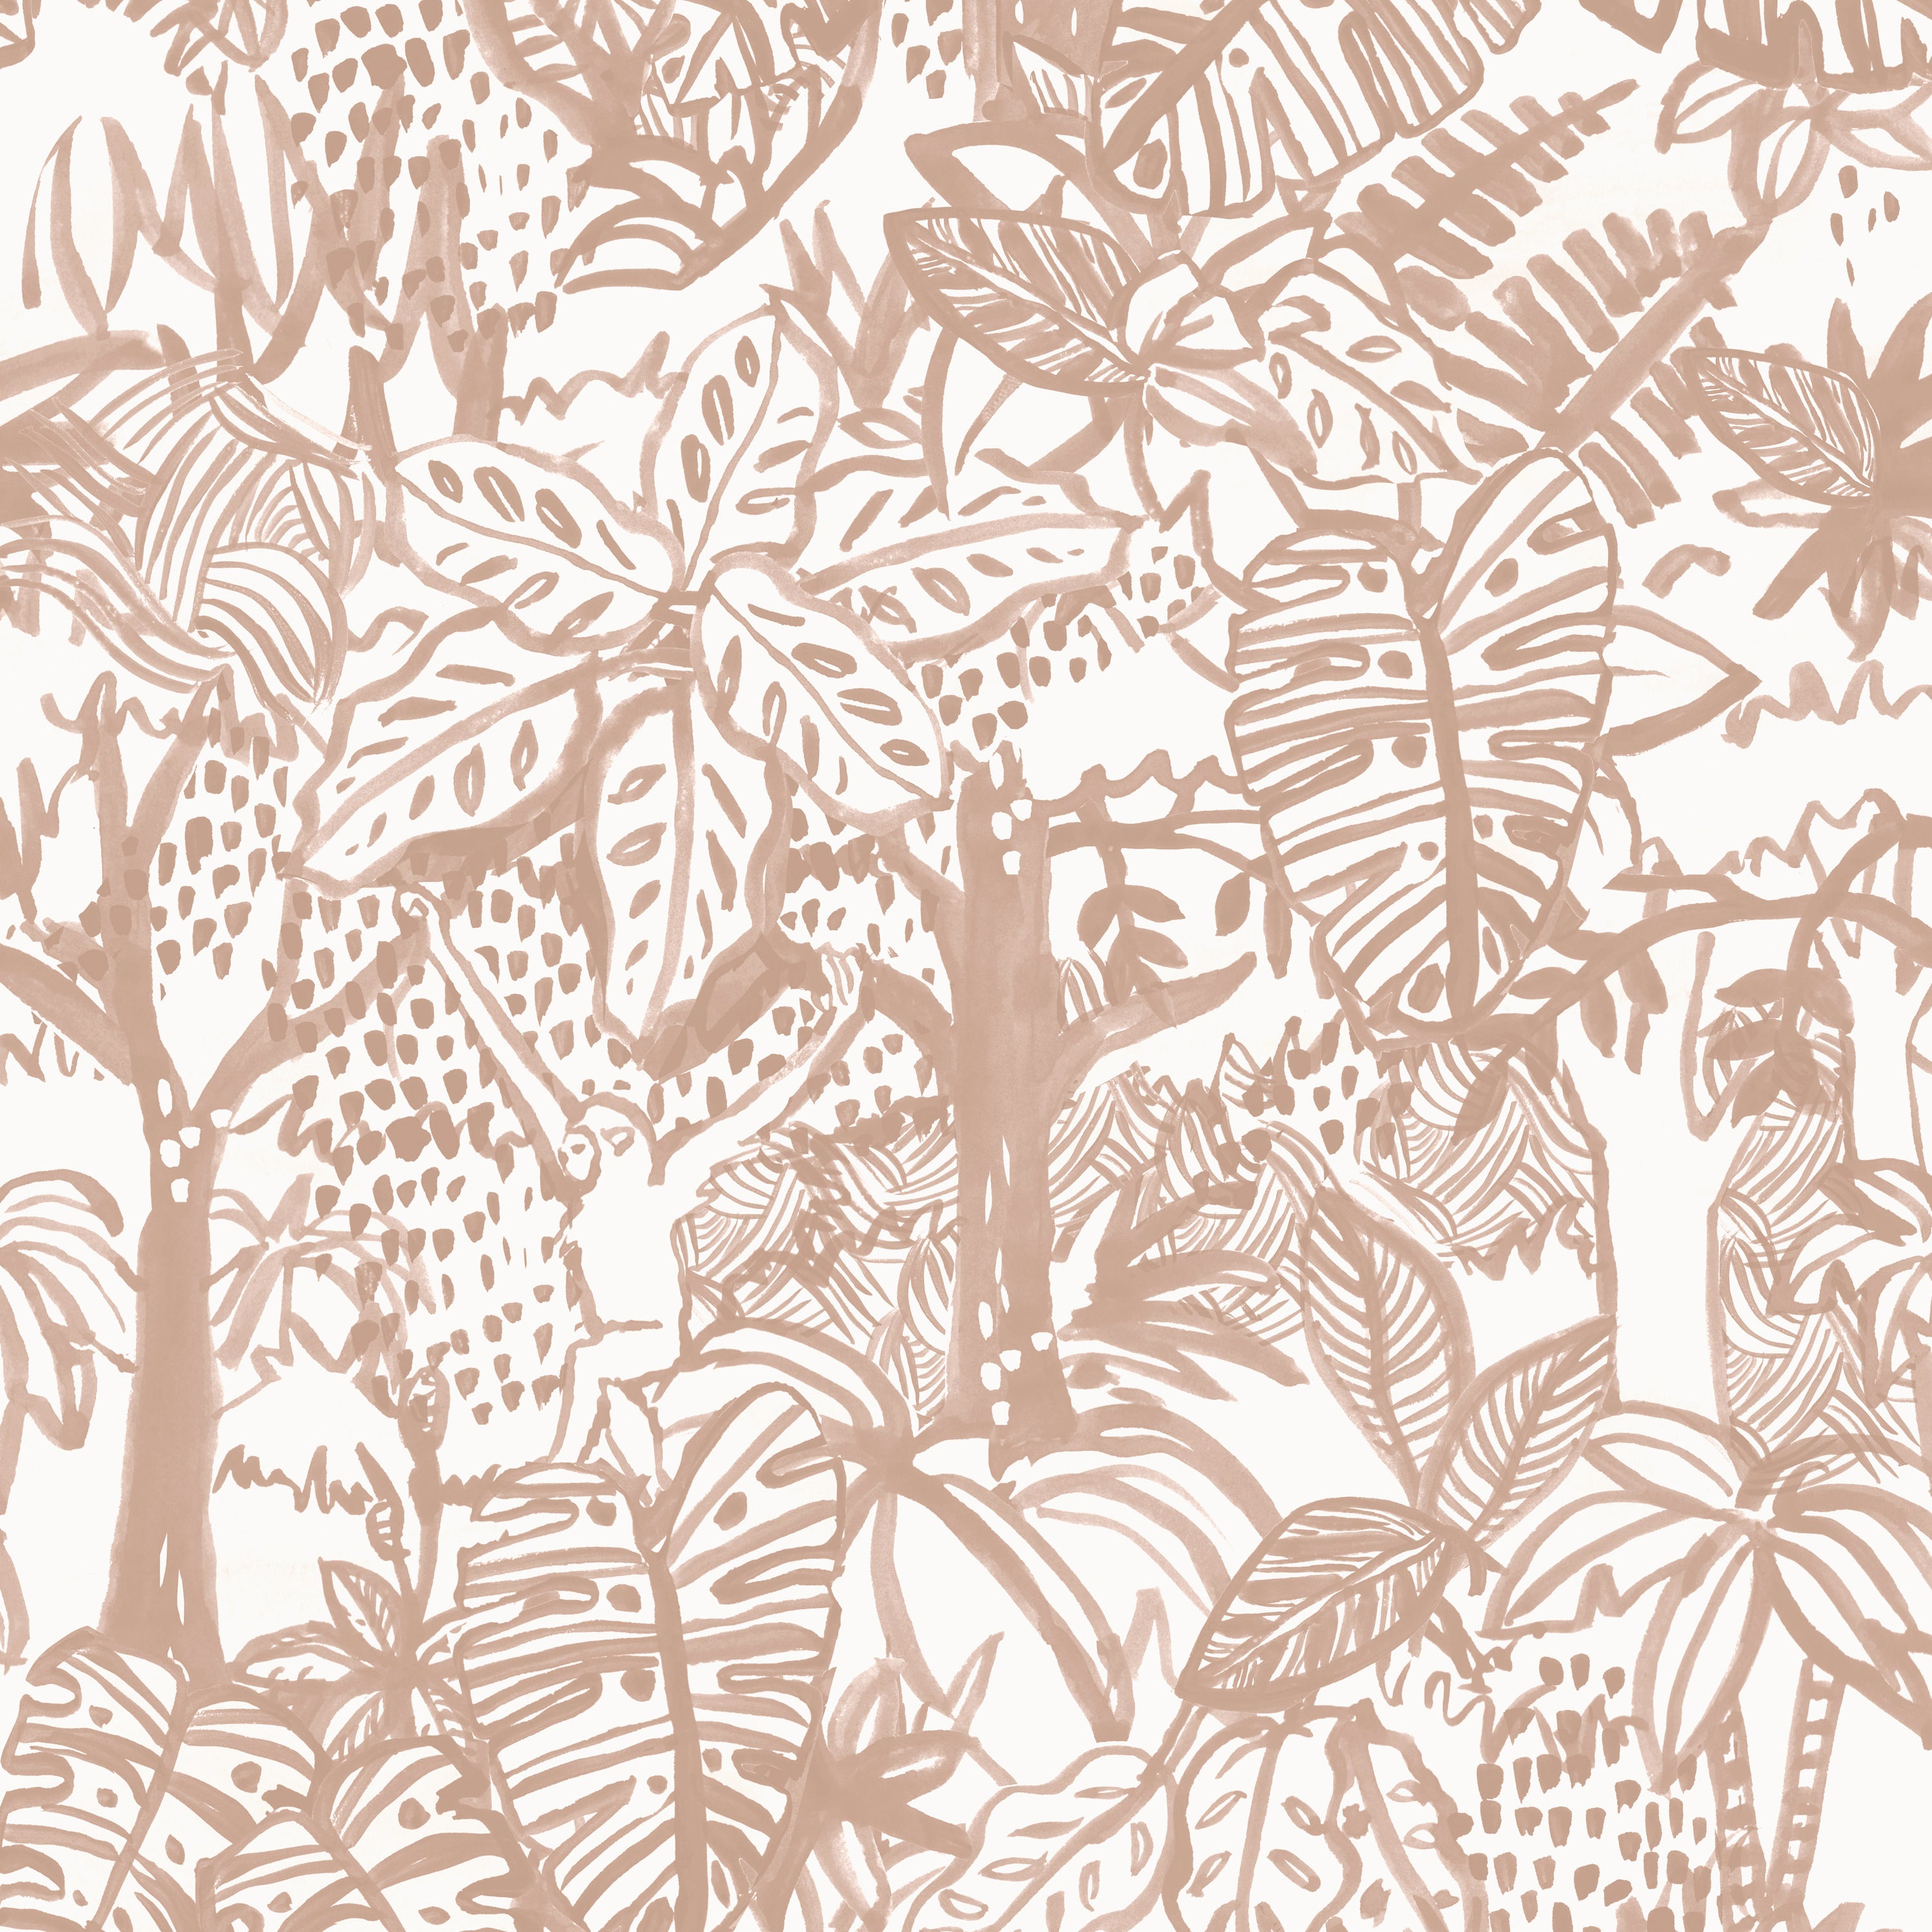 Detail of wallpaper in a playful jungle print in blush on a cream field.